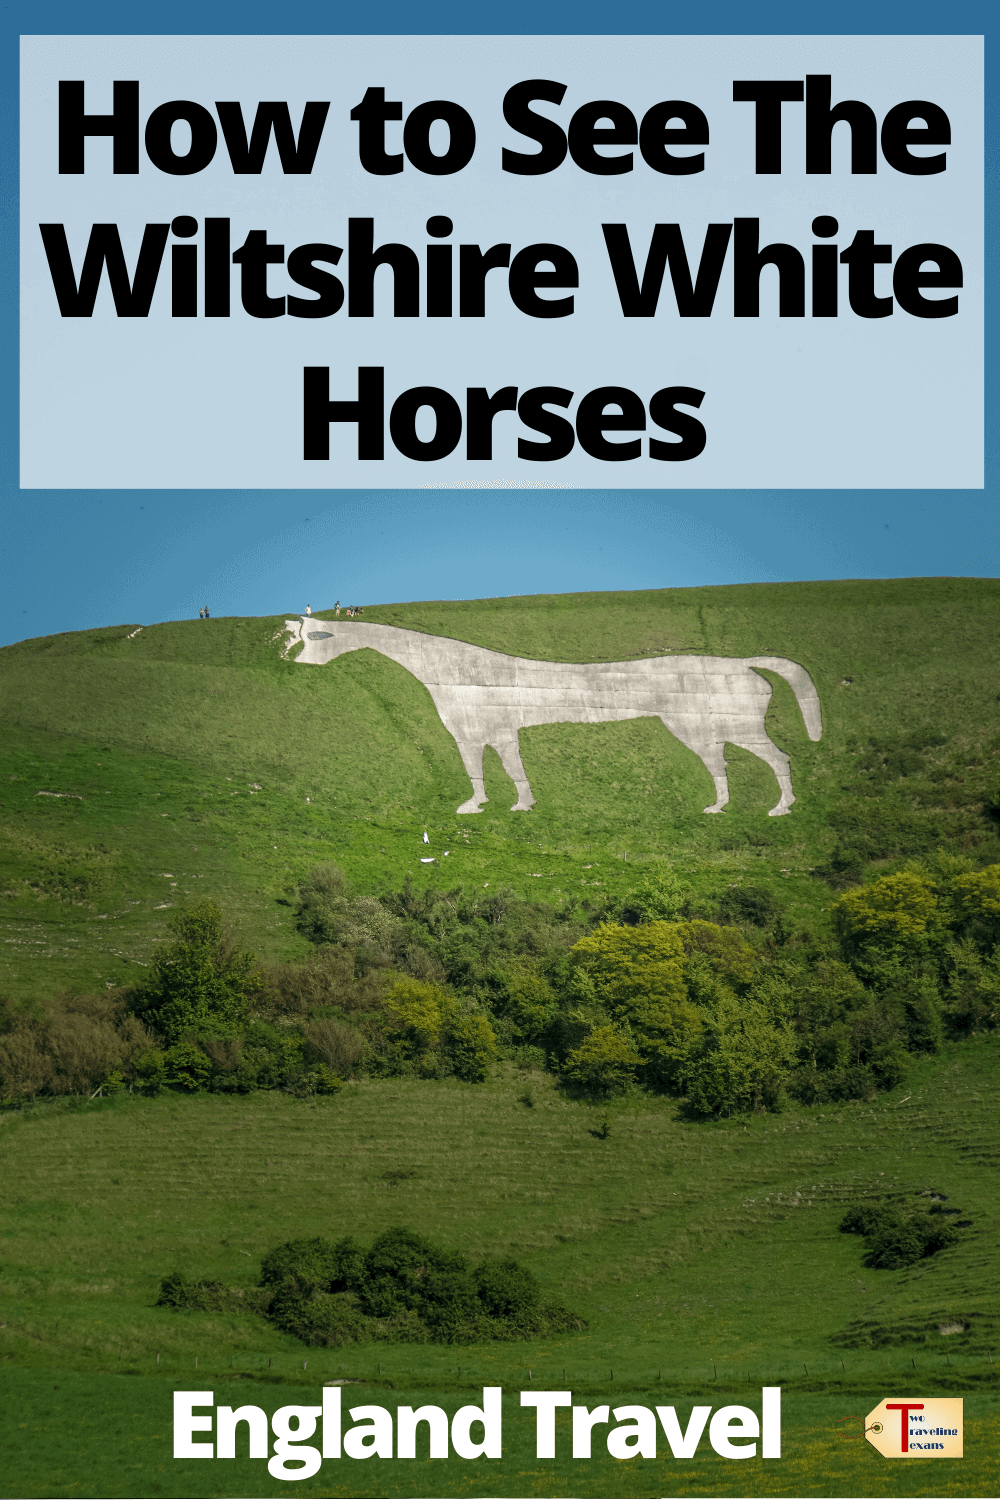 westbury white house with text "how to see the wiltshire white horses - engand travel"